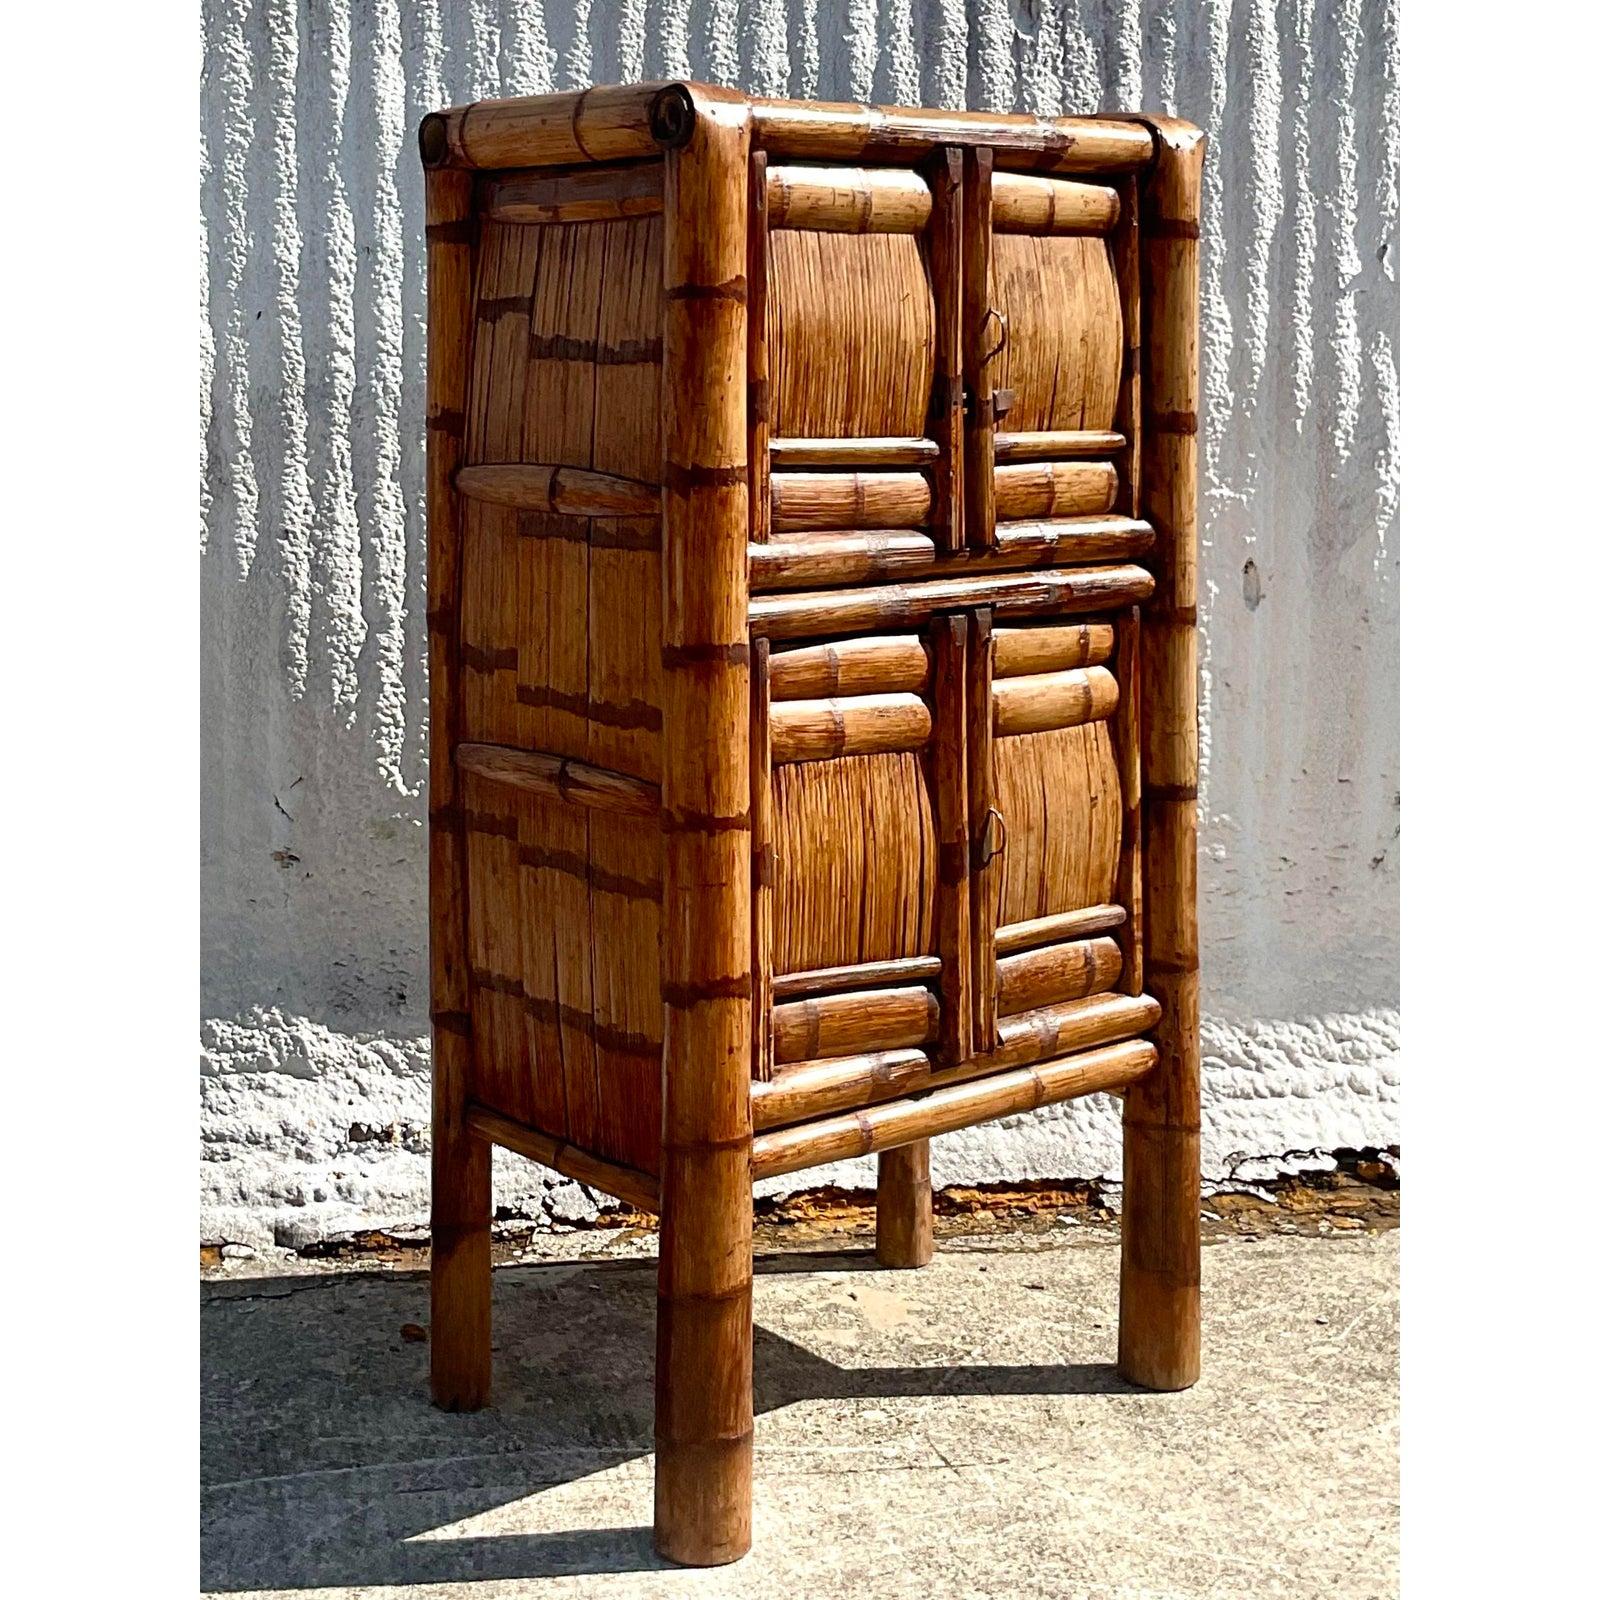 Incredible vintage Coastal armoire. Beautiful elephant bamboo frame with a simple design. Interior slat shelves with a sliding wood latch on the top cabinets. Perfect as an armoire, but also great by the pool for towel storage. Or even a chic Tiki